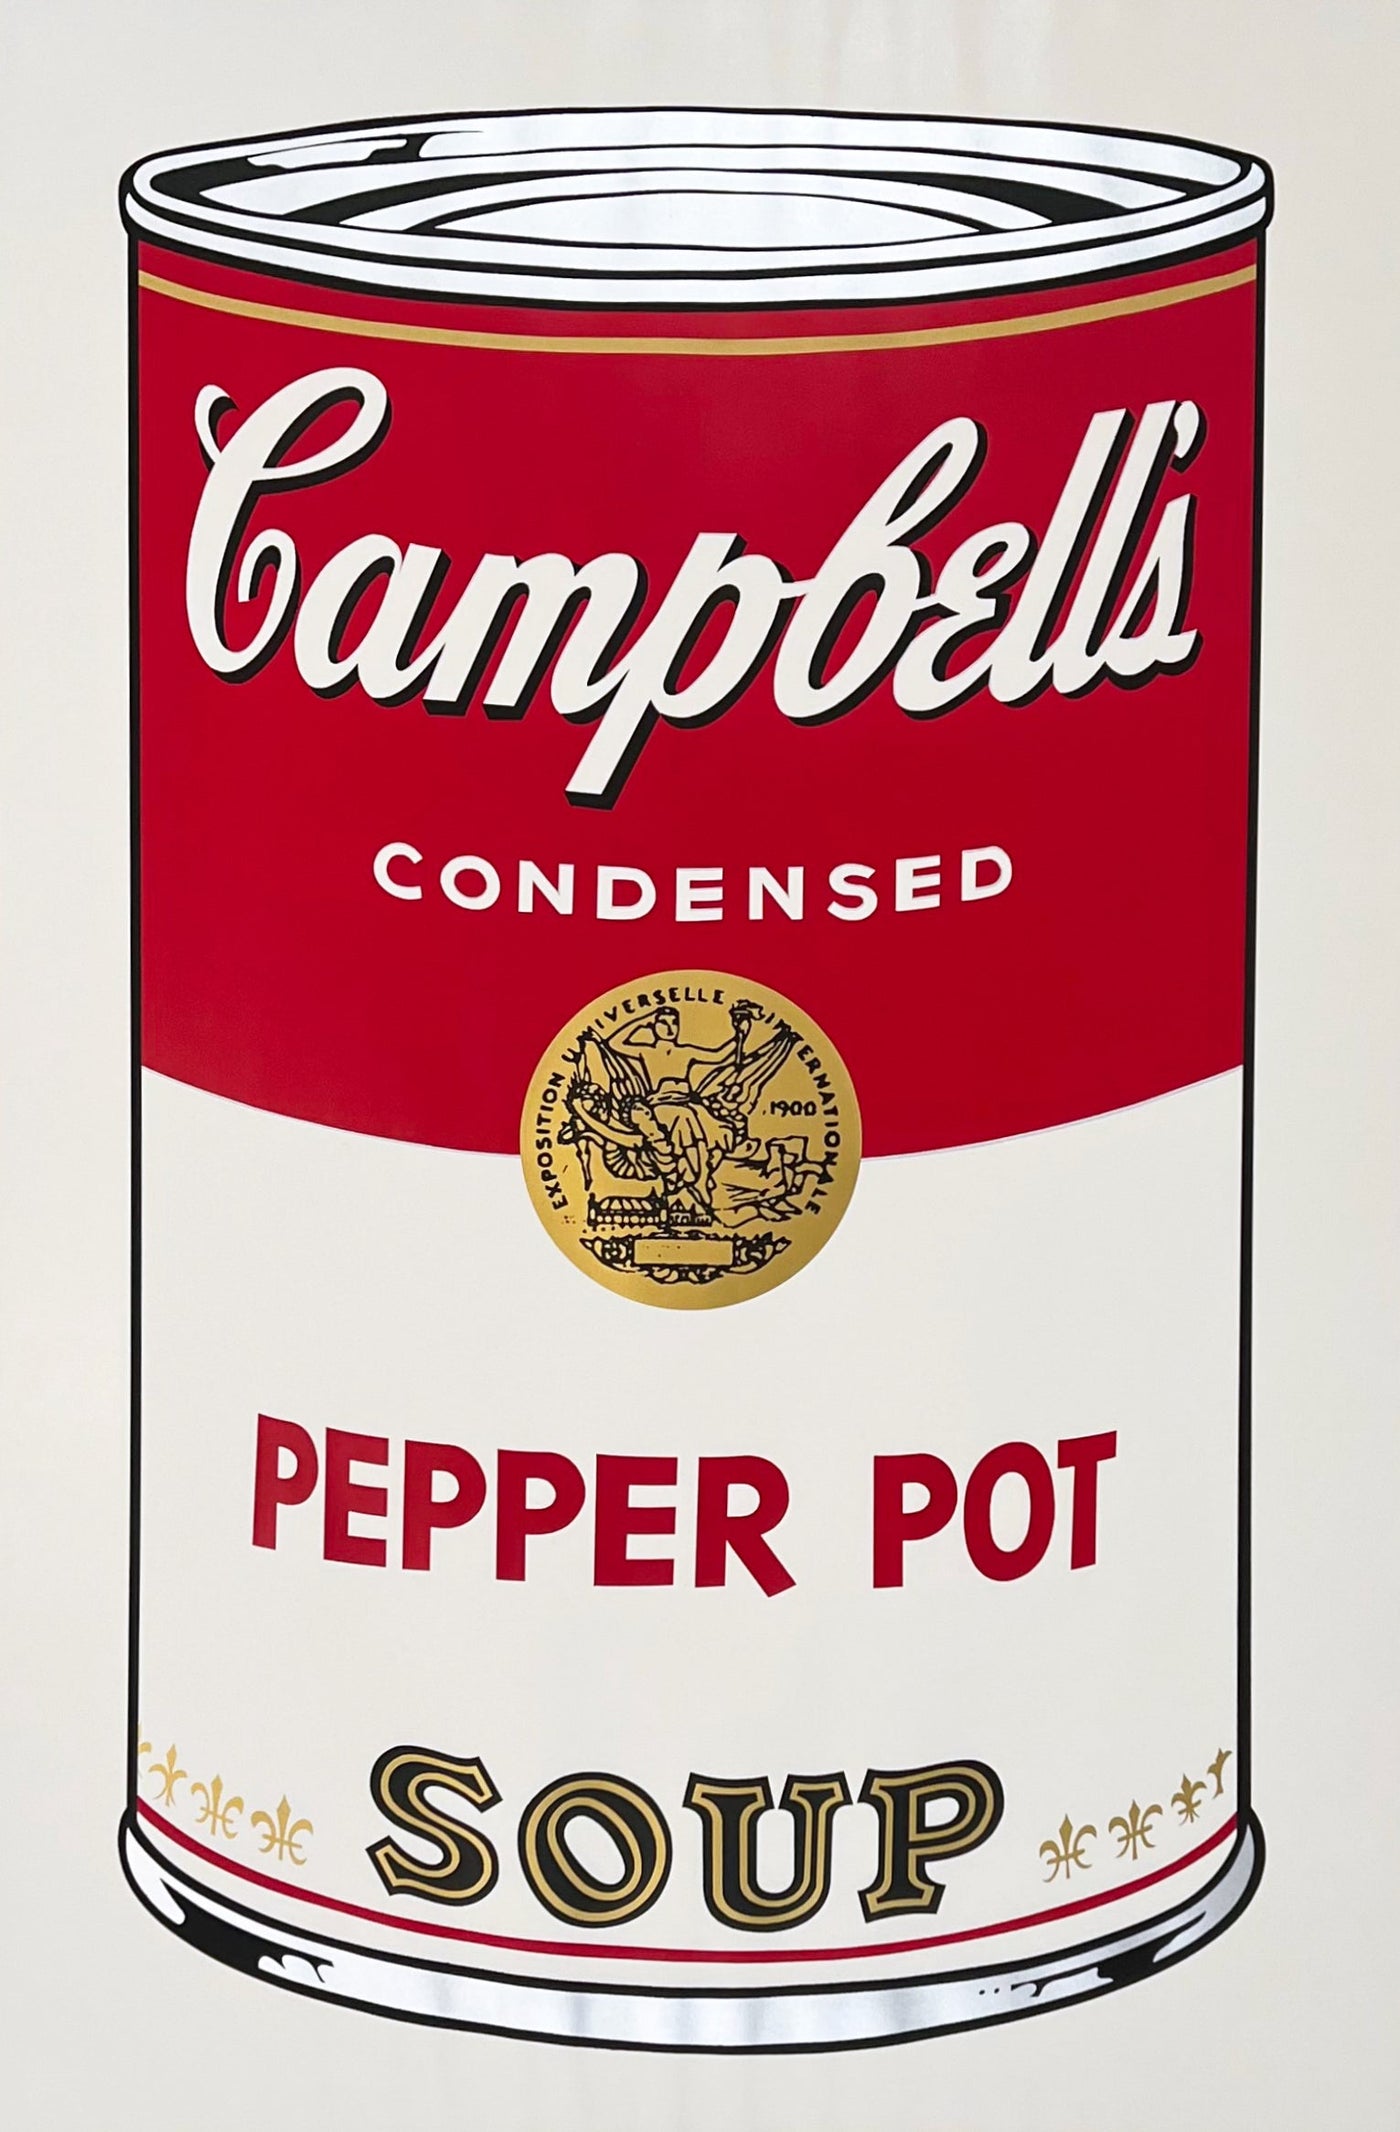 Sunday B. Morning (after Andy Warhol) Pepper Pot